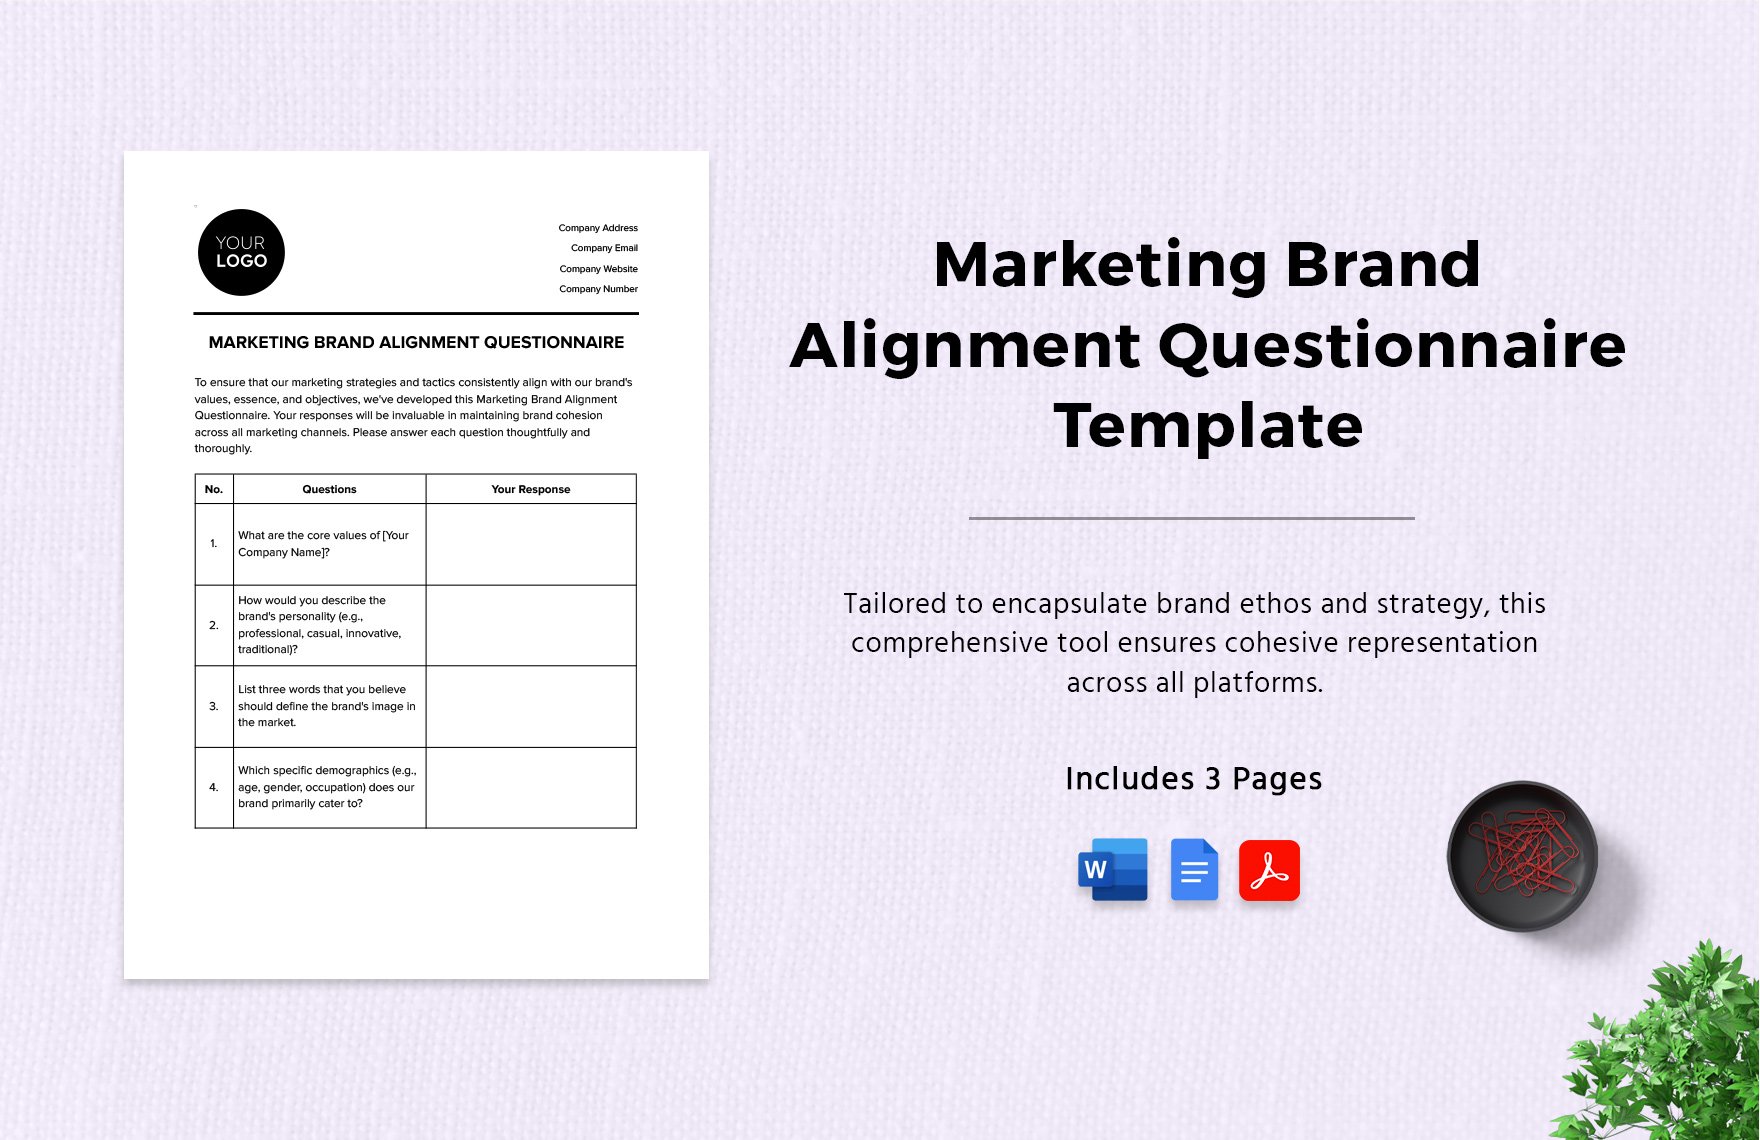 Marketing Brand Alignment Questionnaire Template in Word, Google Docs, PDF